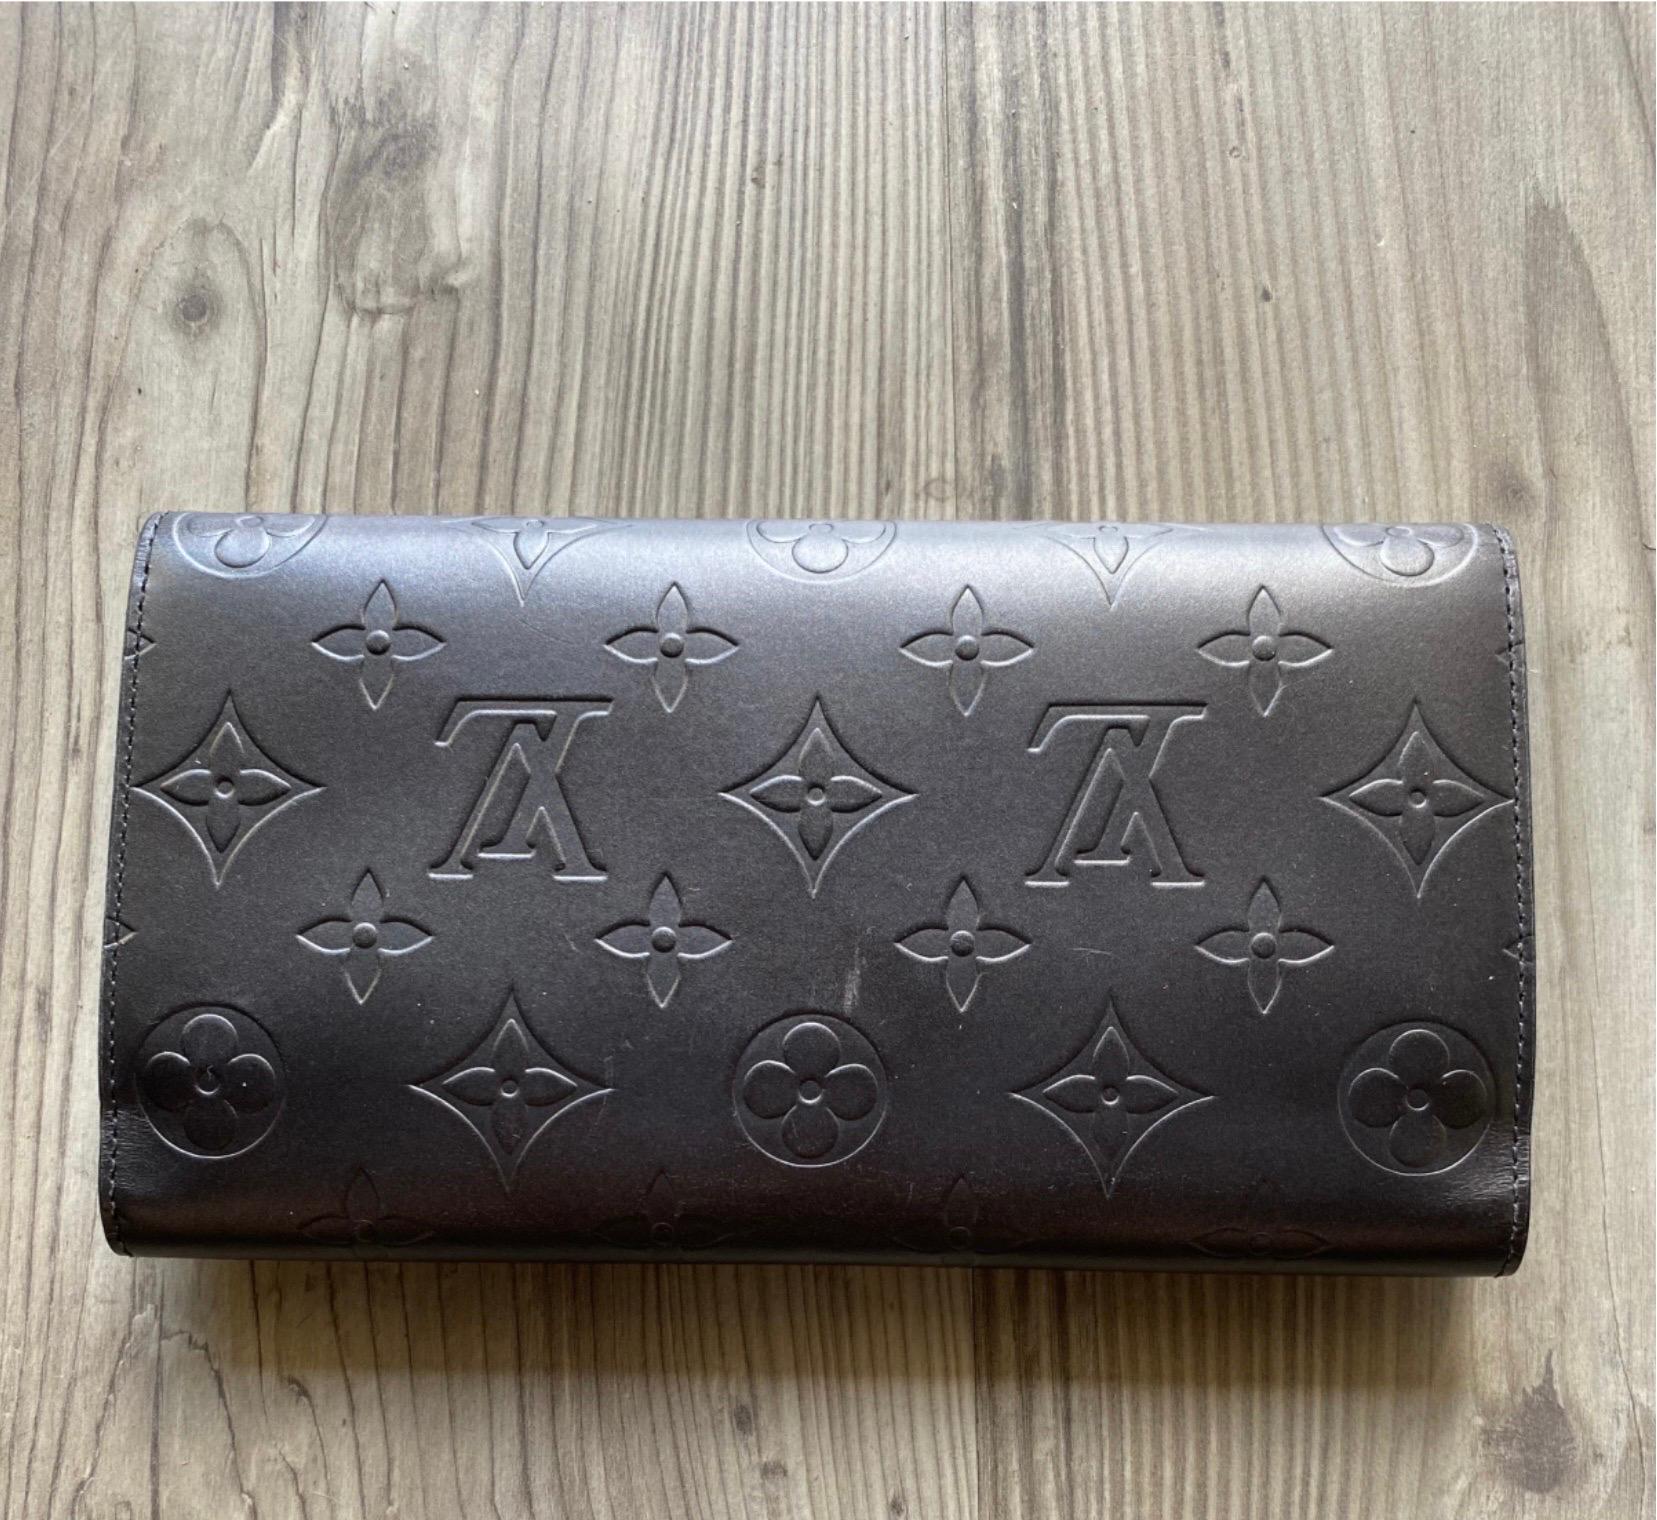 Louis Vuitton monogram glacé wallet, in gray colour, base measures 19cm high 11cm, with card slots and coins slot, the wallet is in more than good condition, there is a small scratch on the back as shown in the attached photo, with box and dustbag.